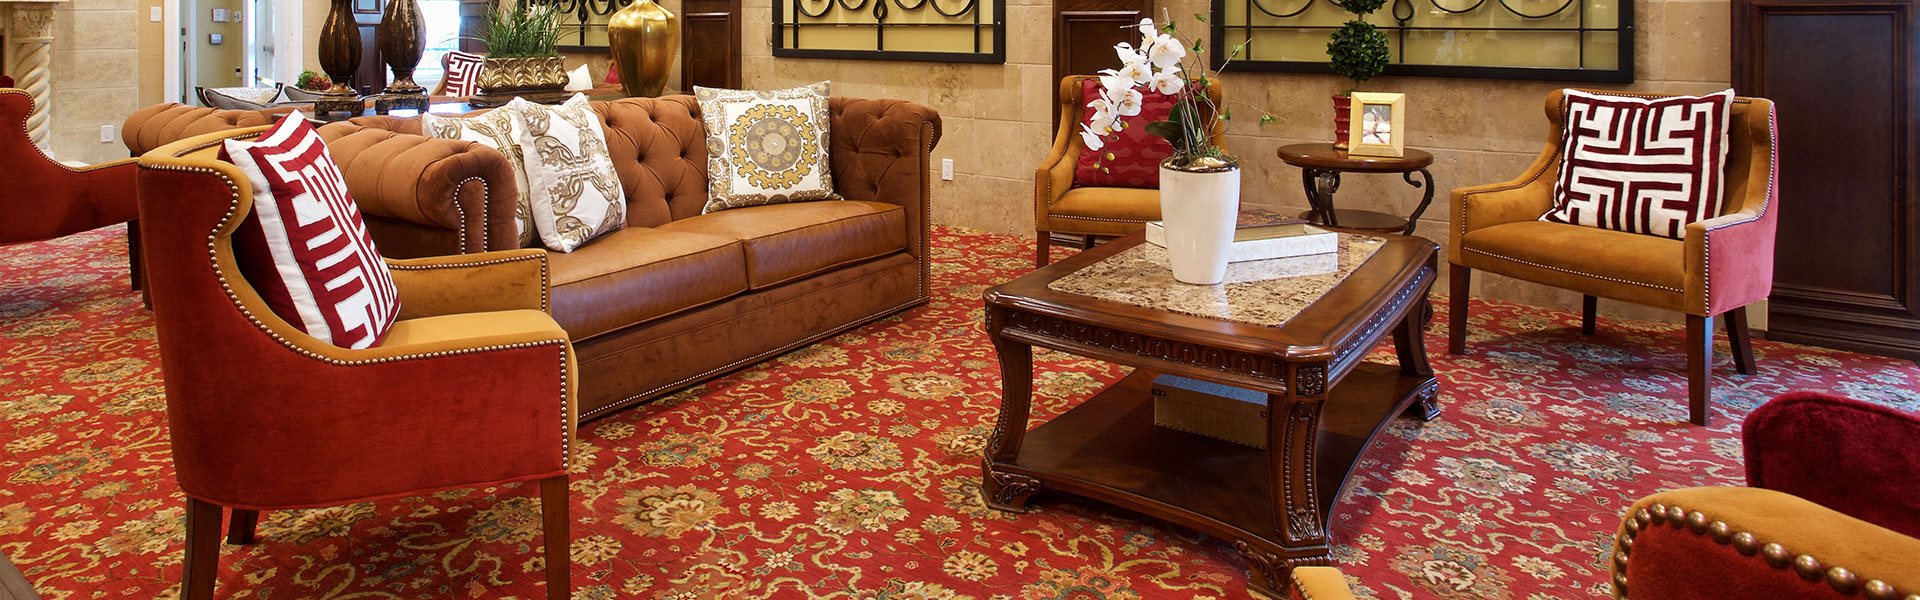 Comfortable Sitting Area to Meet Family and Friends at Pacifica Senior Living Oakland Heights, Oakland, California